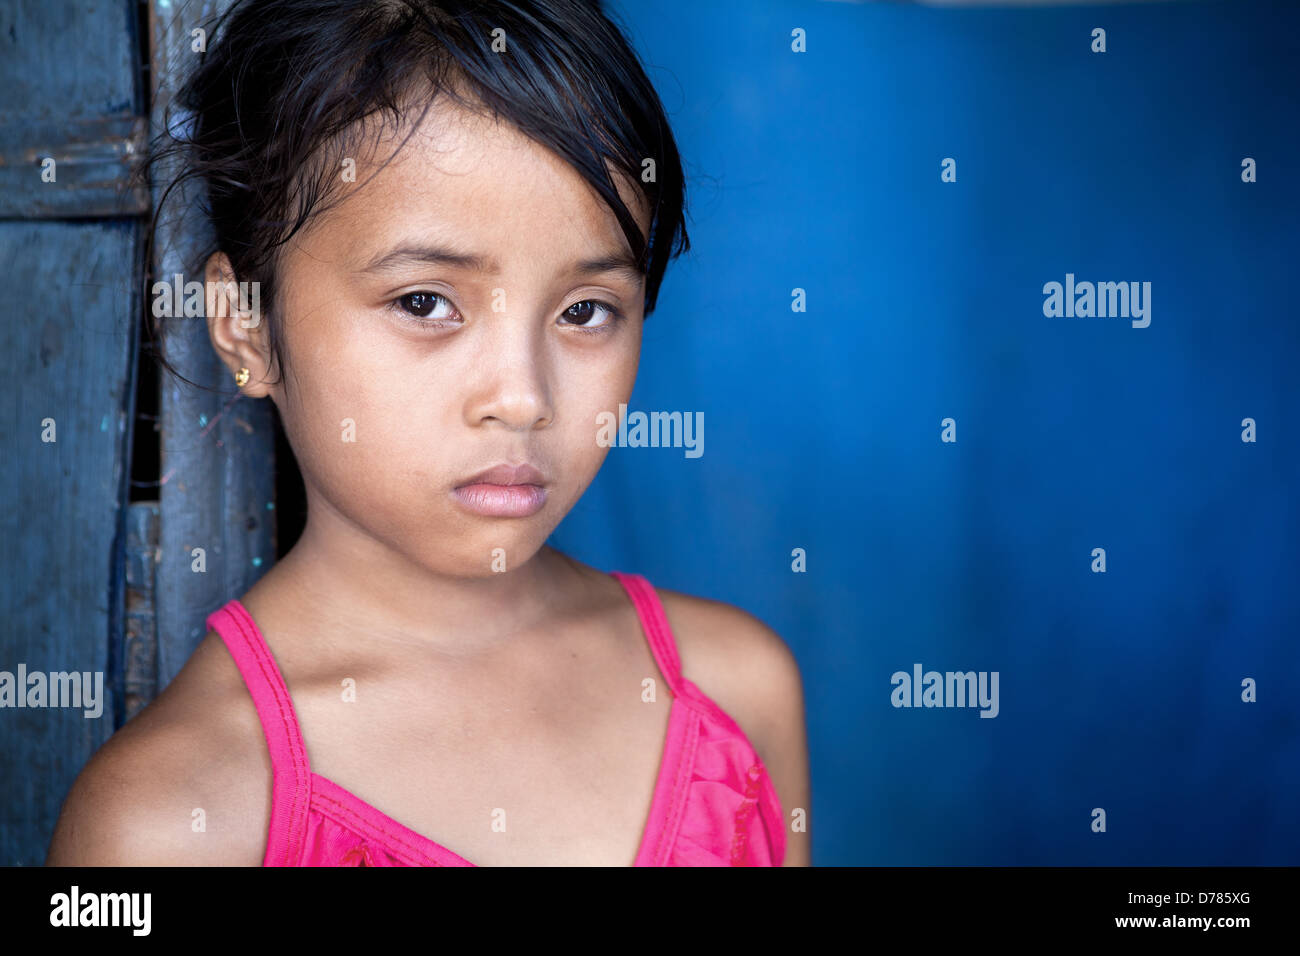 Young Filipina Girl 8 Years Old With Sad And Somber Expressi